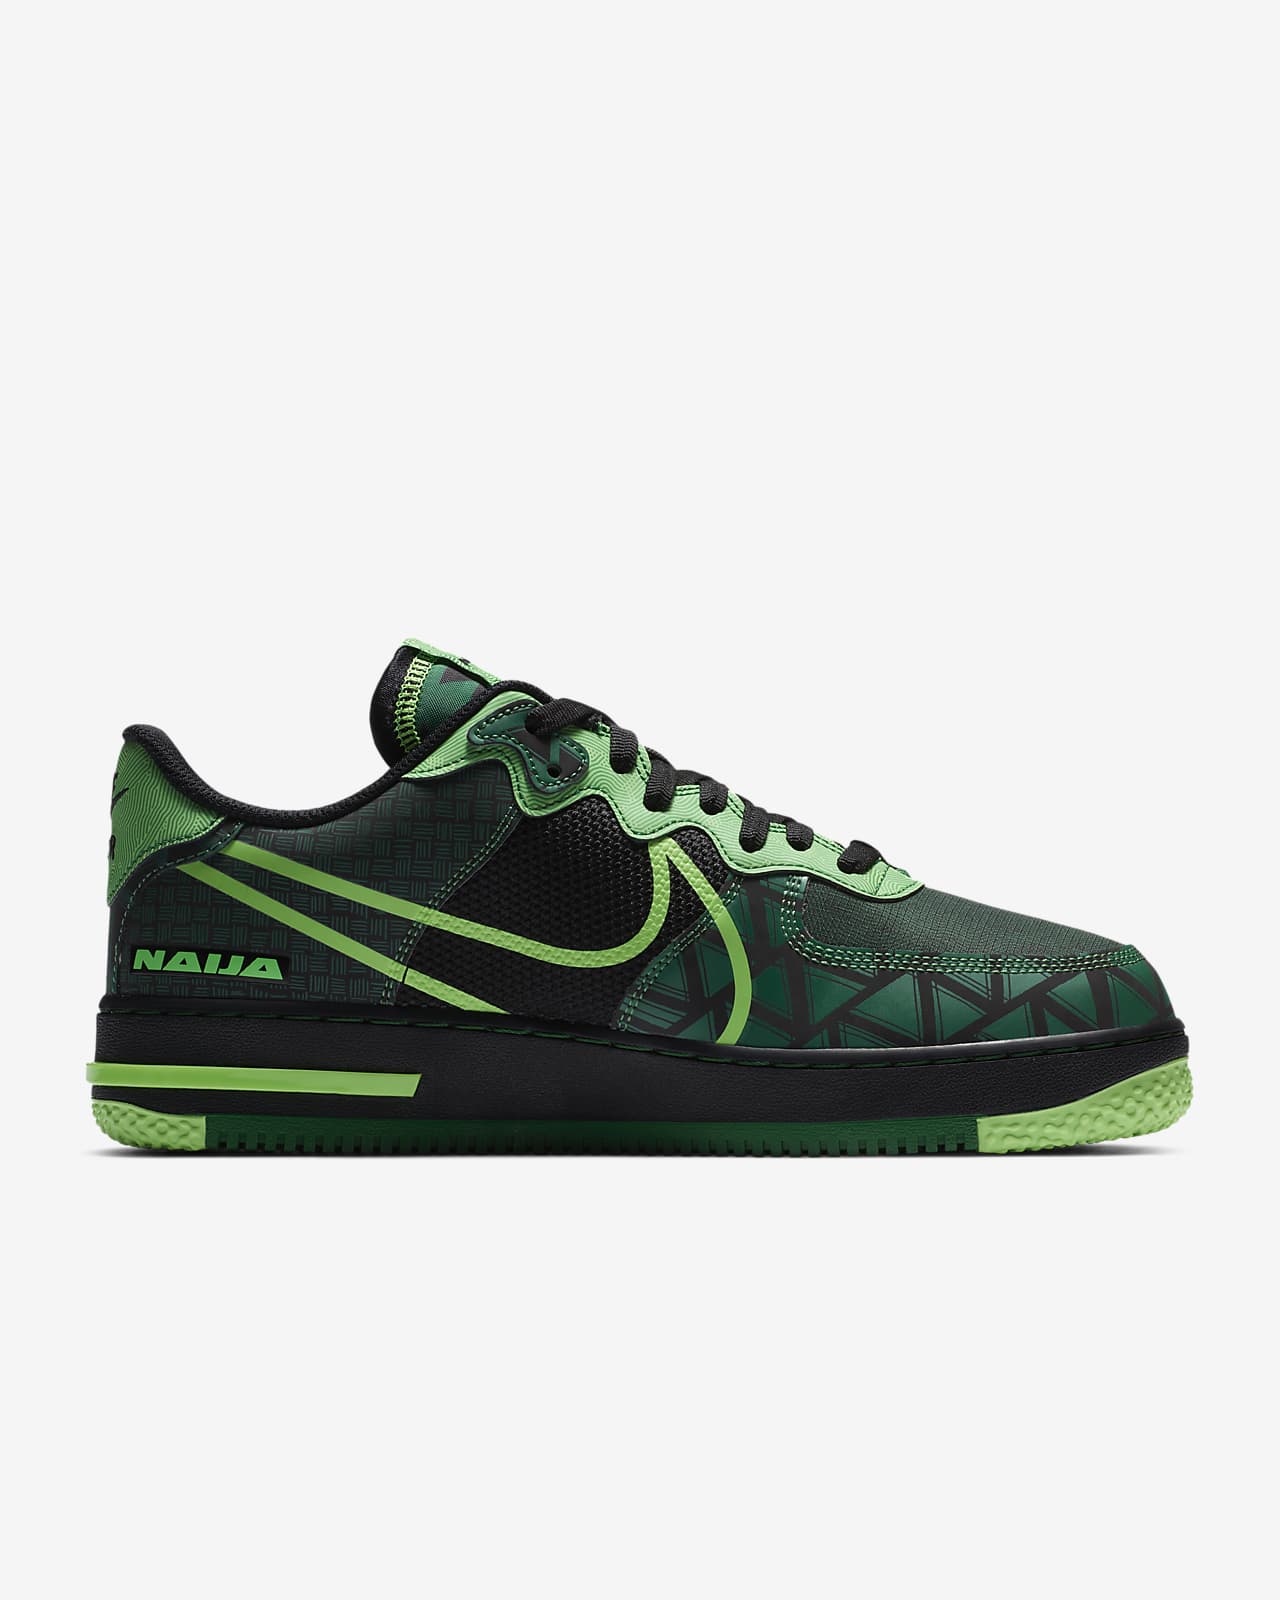 neon green shoes nike air force 1